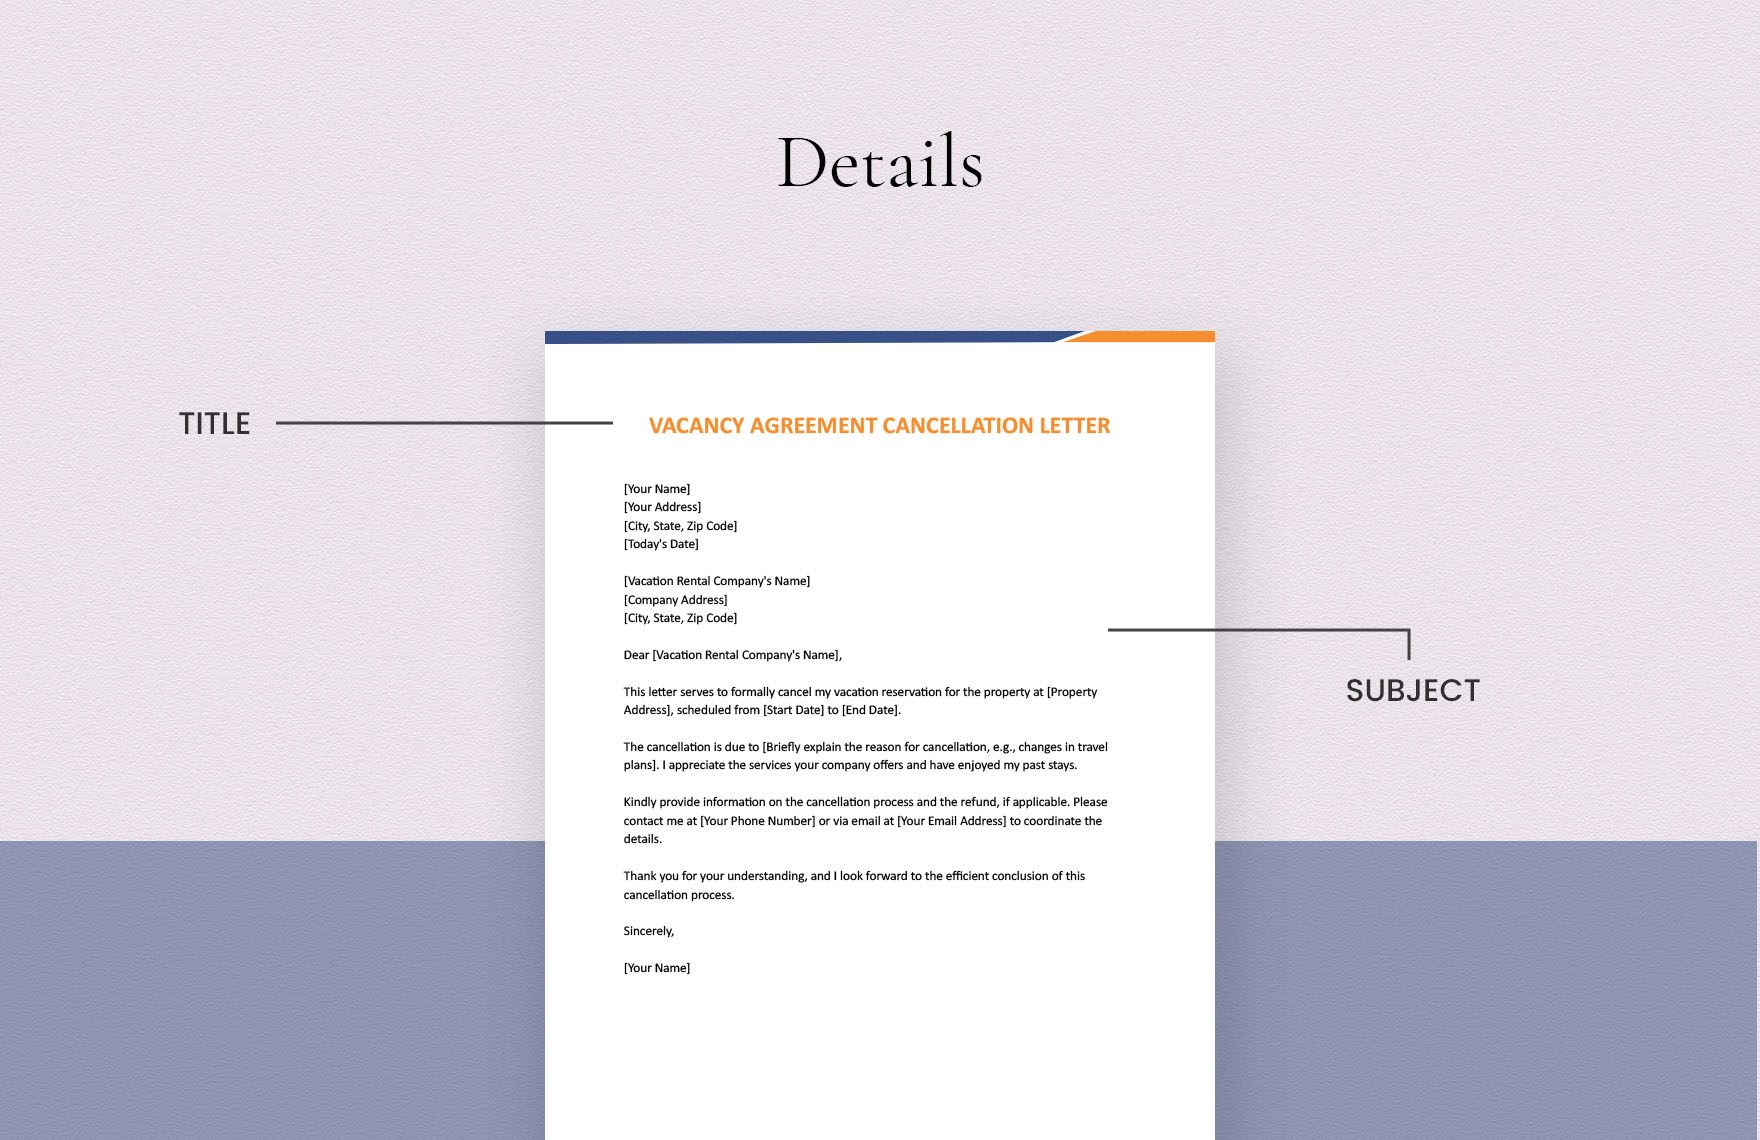 Vacancy Agreement Cancellation Letter